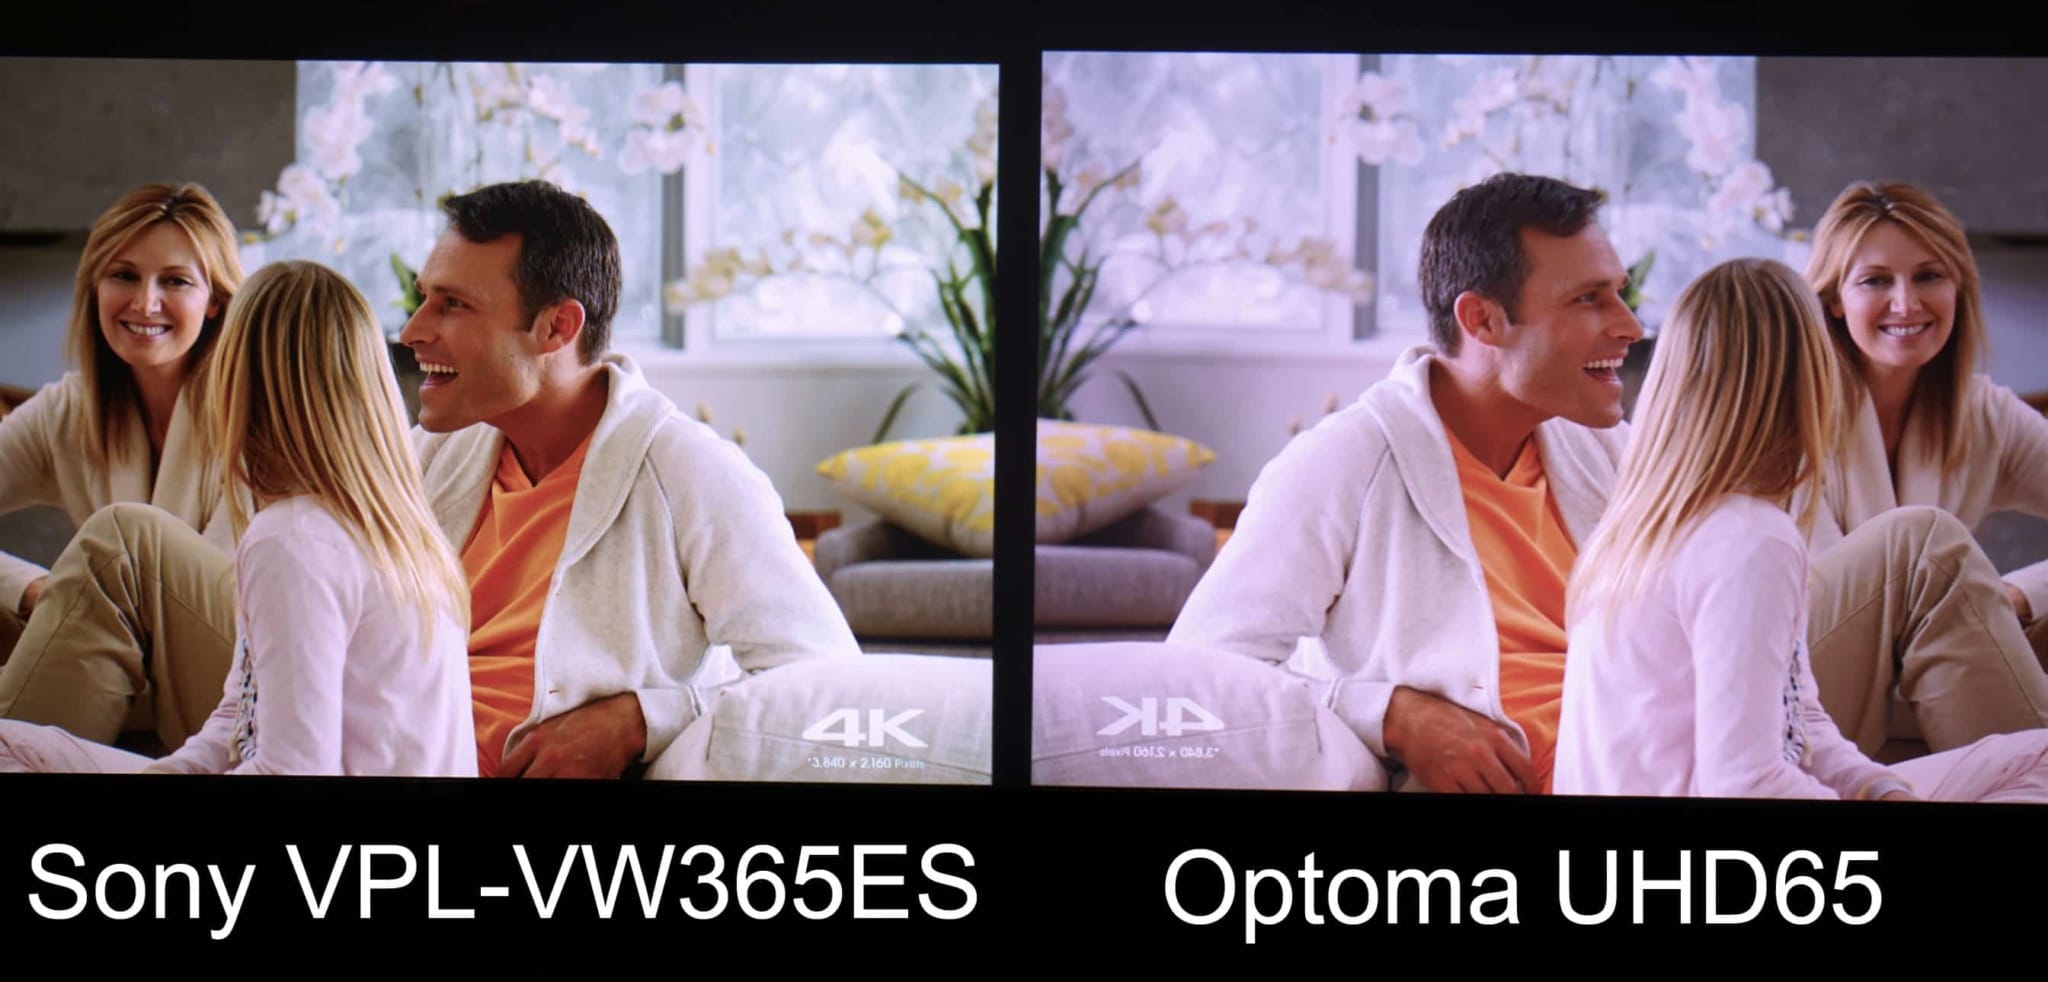 Sony VPL-VW365ES vs Optoma UHD65: Both the Sony on the left and the Optoma on the right did an excellent job on skin tones even though the preset D6500 degrees white balance settings did not match.